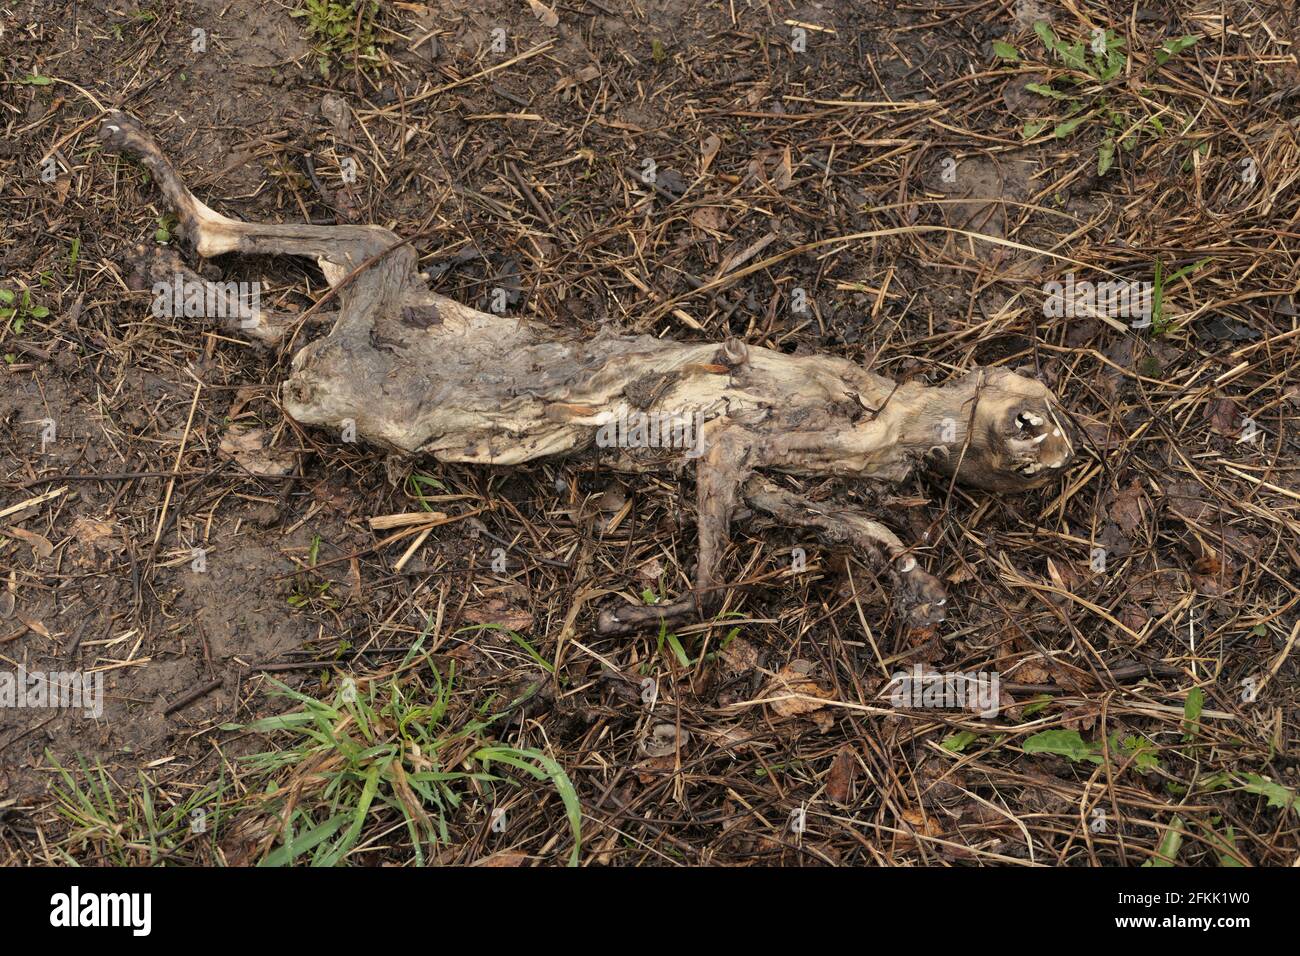 A dead cat on the street. Epidemic and contagion. Ecology. Dead, decomposing animals. Stock Photo